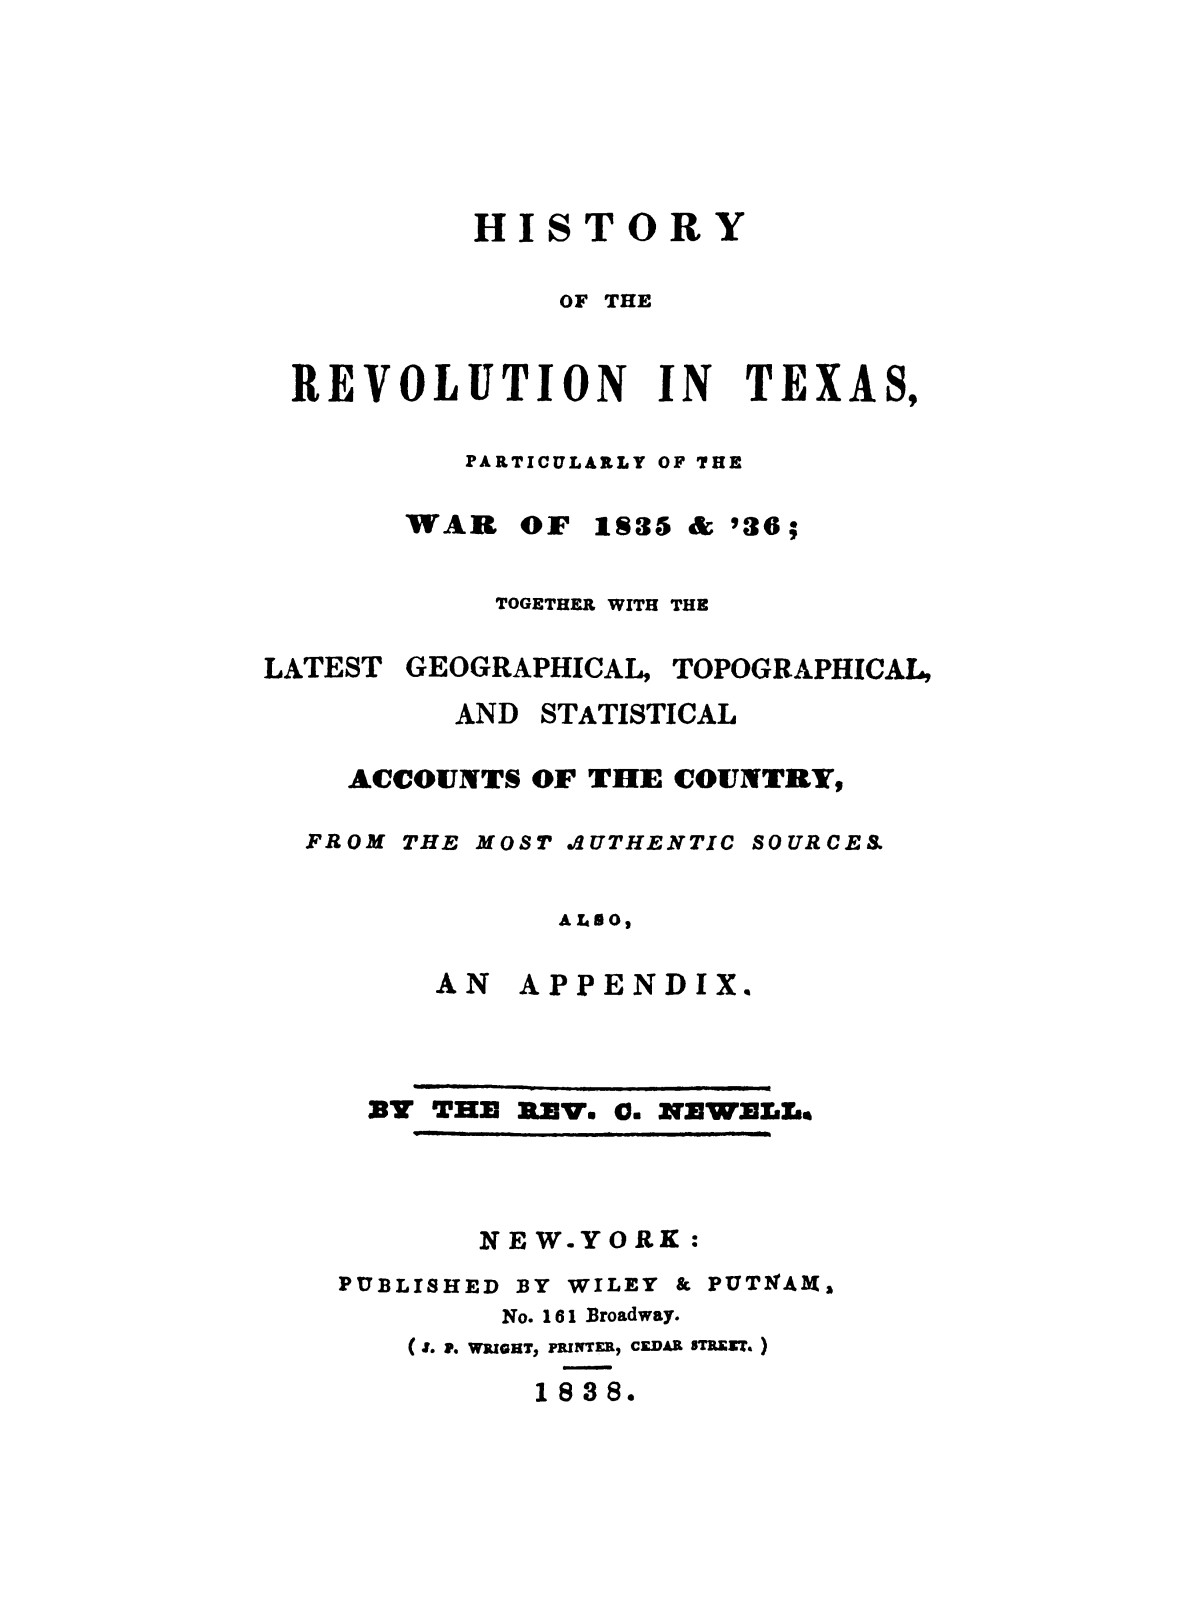 History of the Revolution in Texas, Particularly of the War of 1835 & '36; Together With the Latest Geographical, Topographical, and Statistical Accounts of the Country, From the Most Authentic Sources. Also, an Appendix.
                                                
                                                    [Sequence #]: 1 of 227
                                                